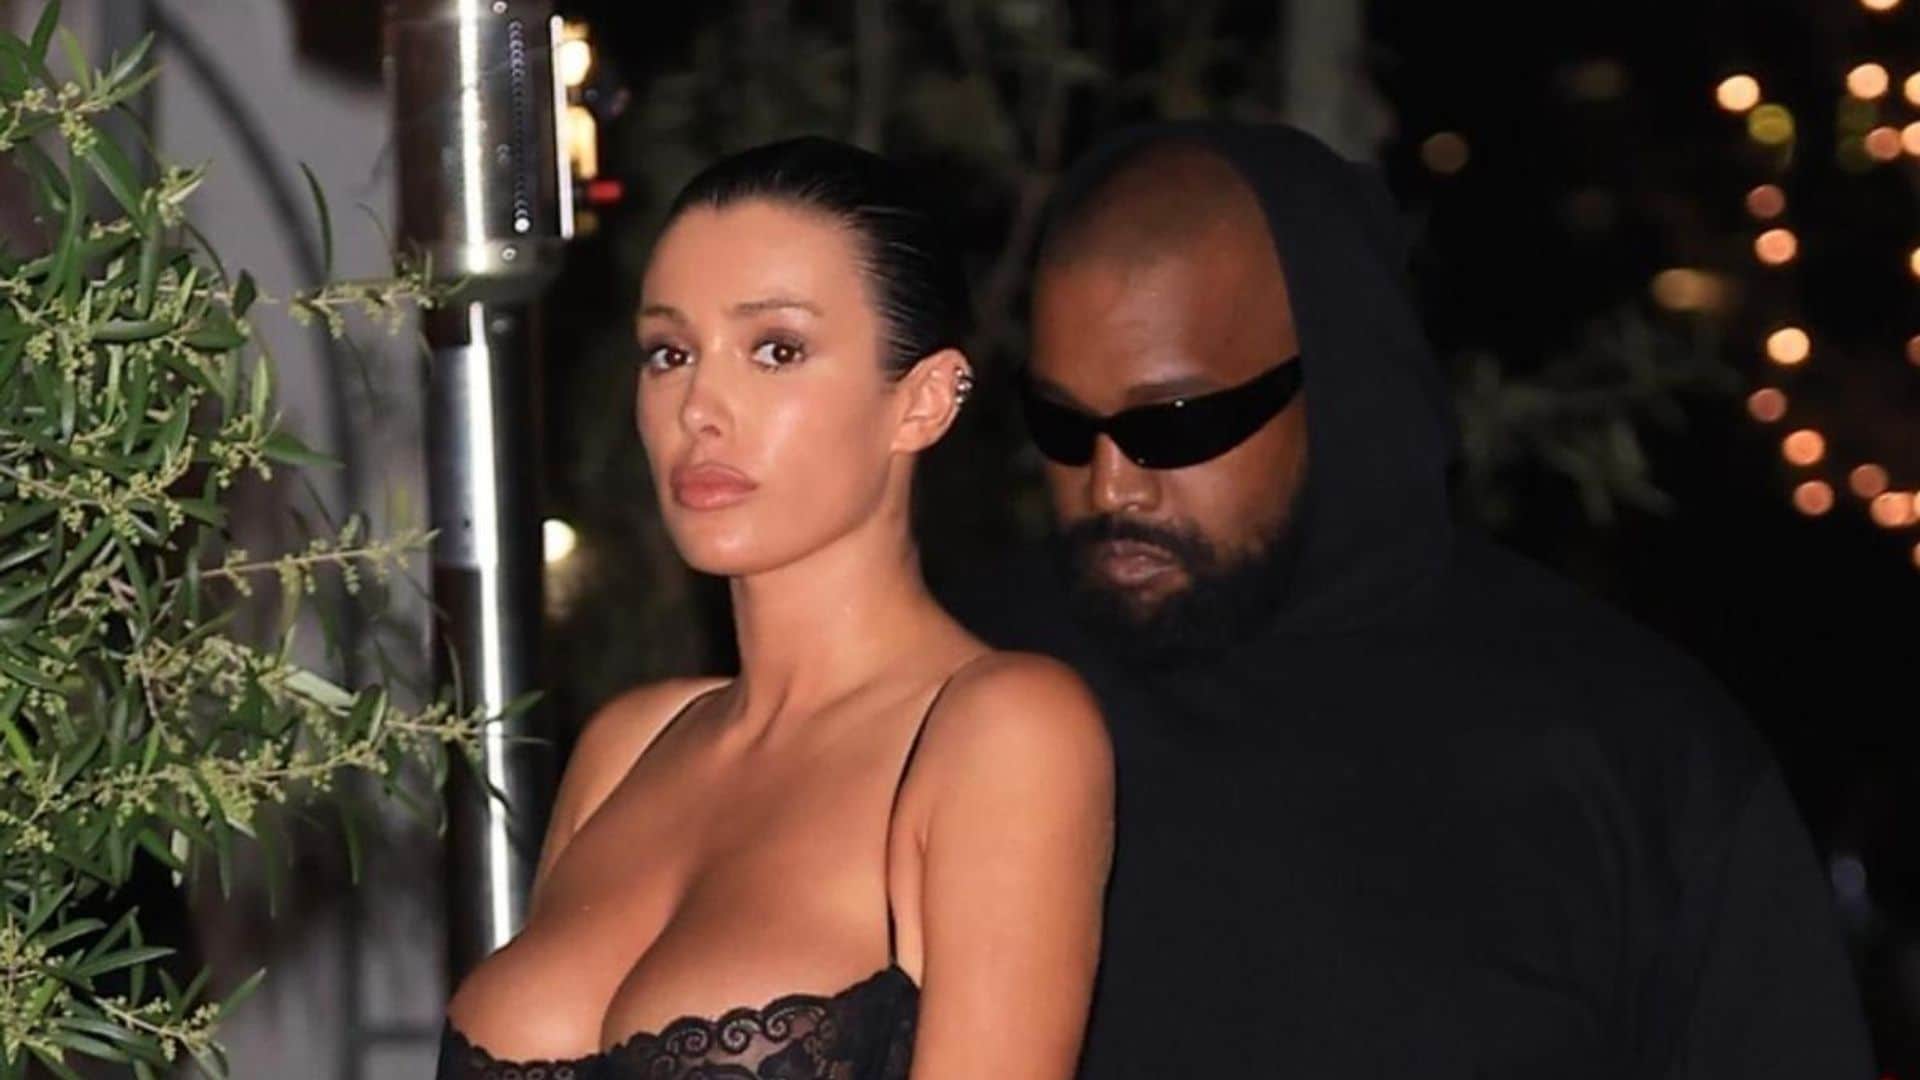 Bianca Censori steps out in lingerie set in romantic outing with Kanye West